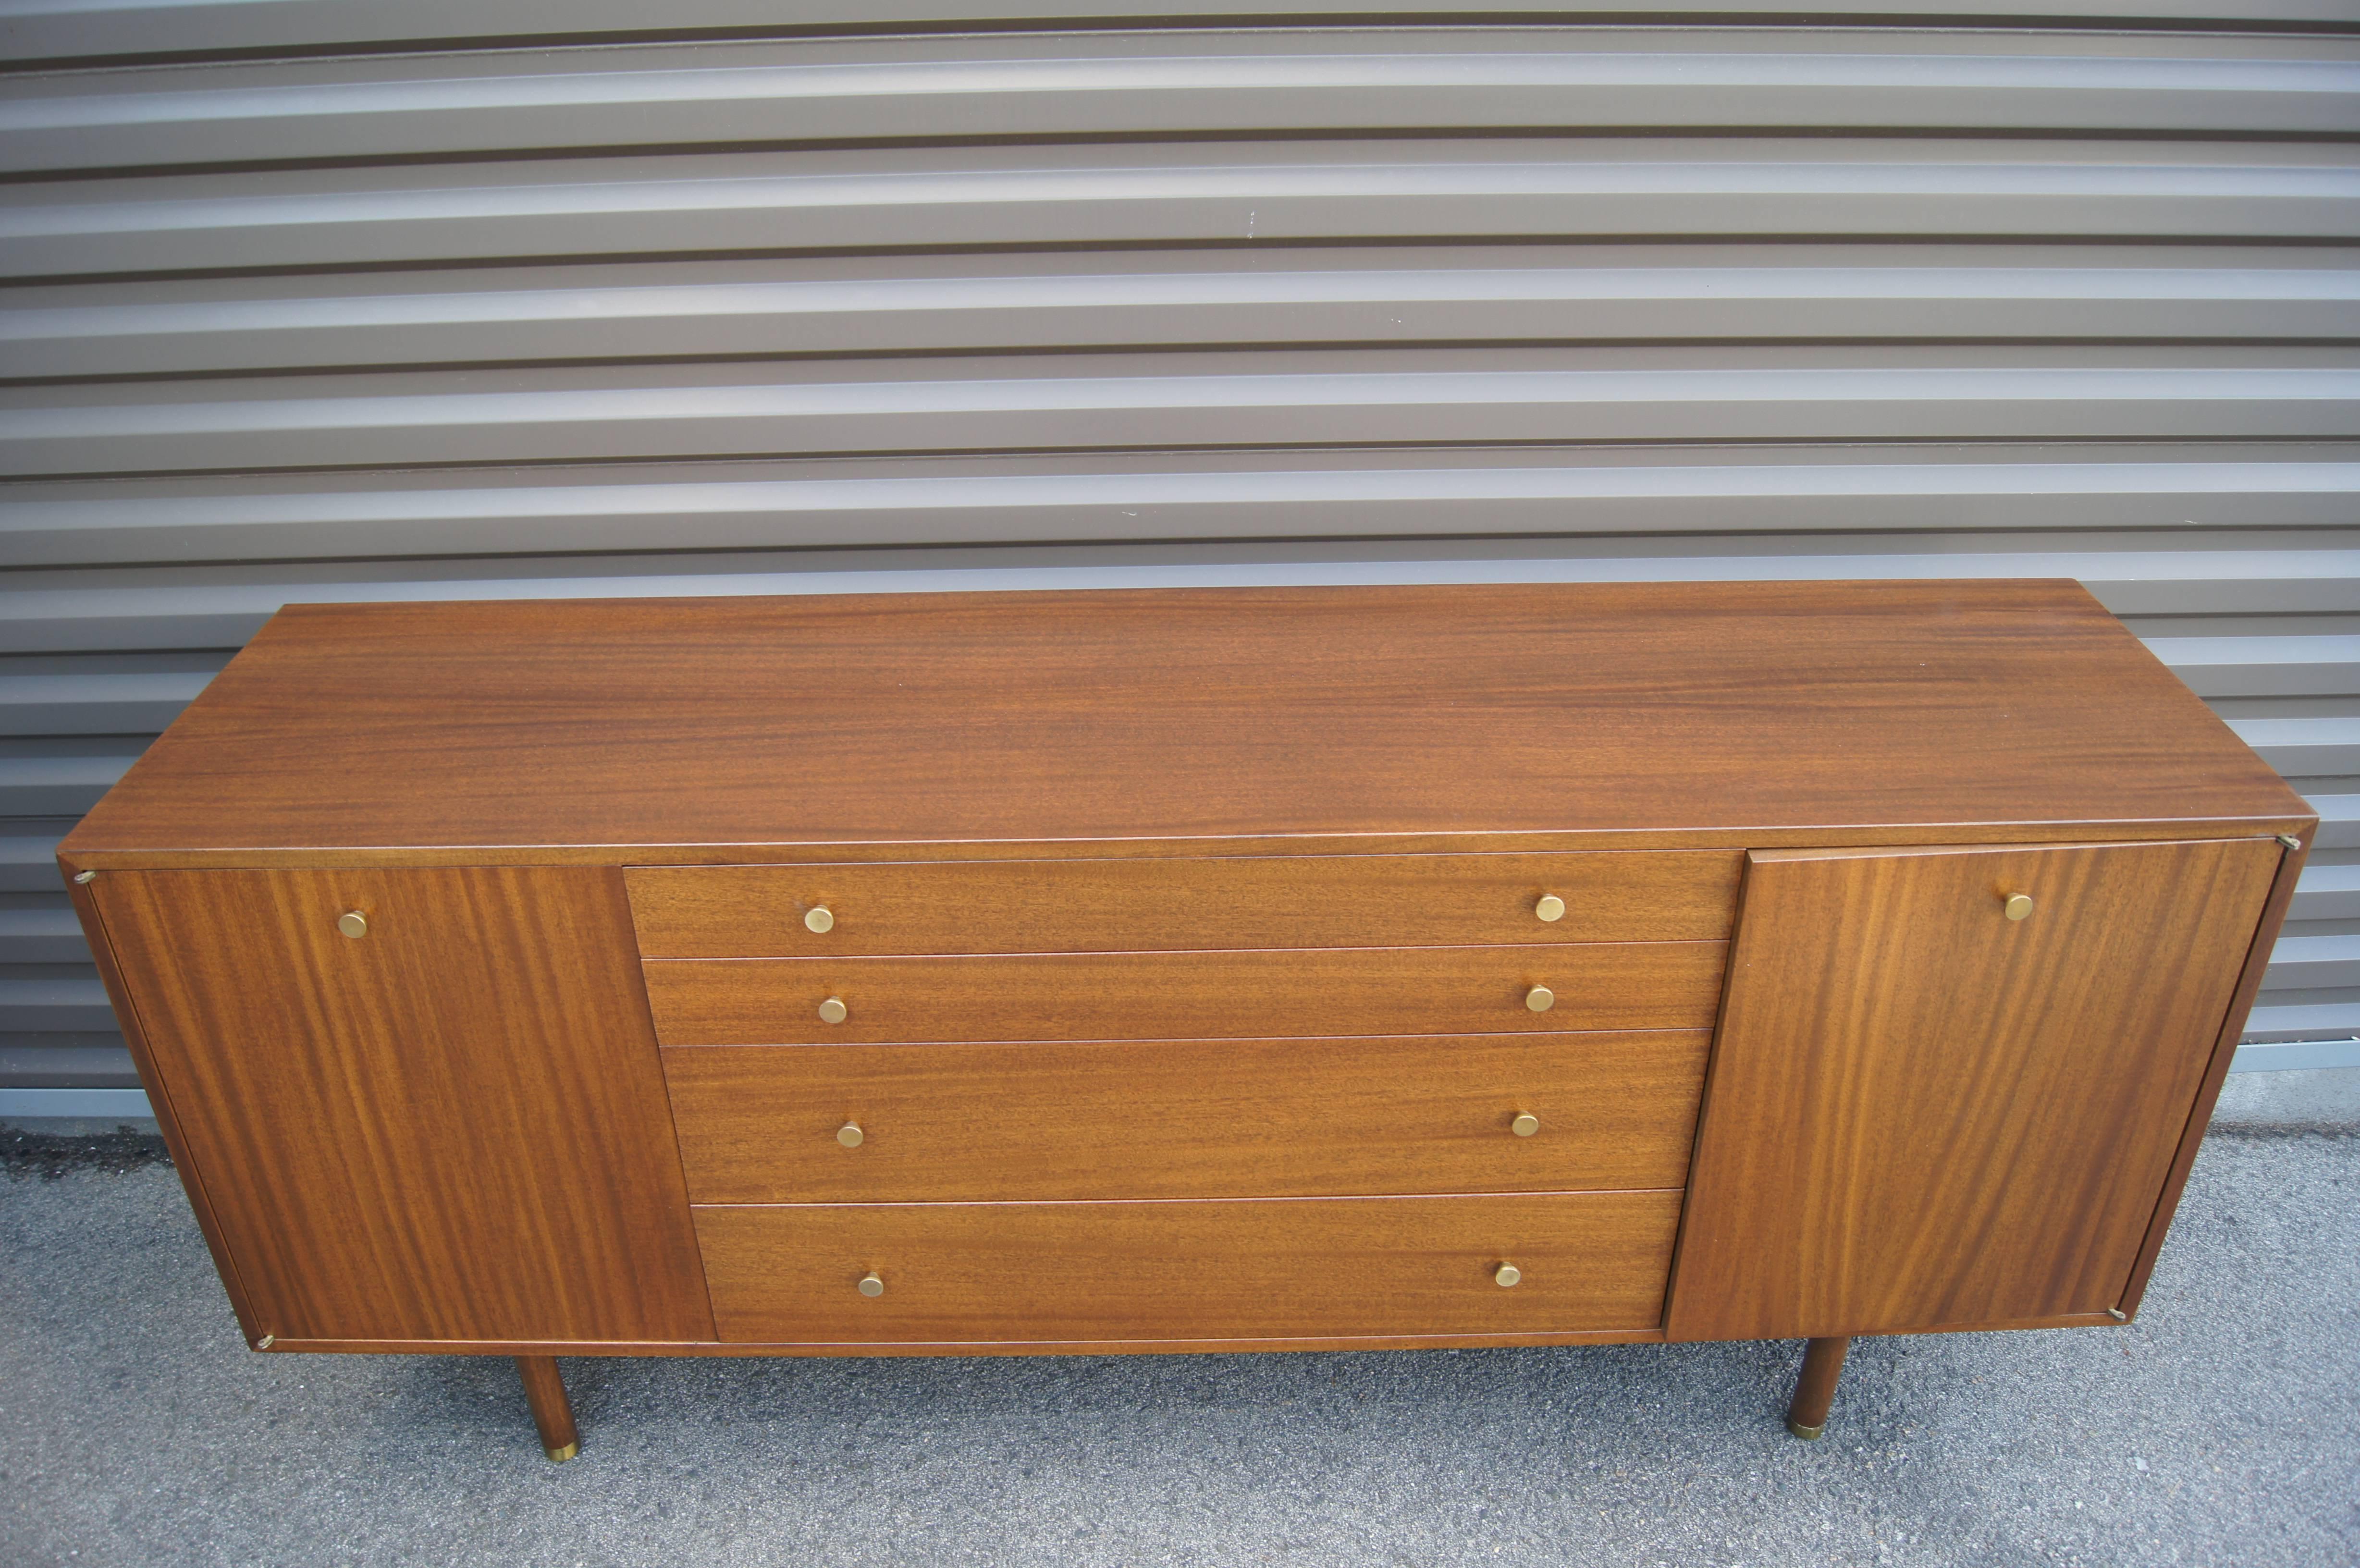 Designed by Harvey Probber, this midcentury credenza features a gorgeous mahogany grain complemented by brass pulls and brass-capped legs. Doors on either end conceal adjustable shelves. In the center are two shallow drawers, one felt-lined and